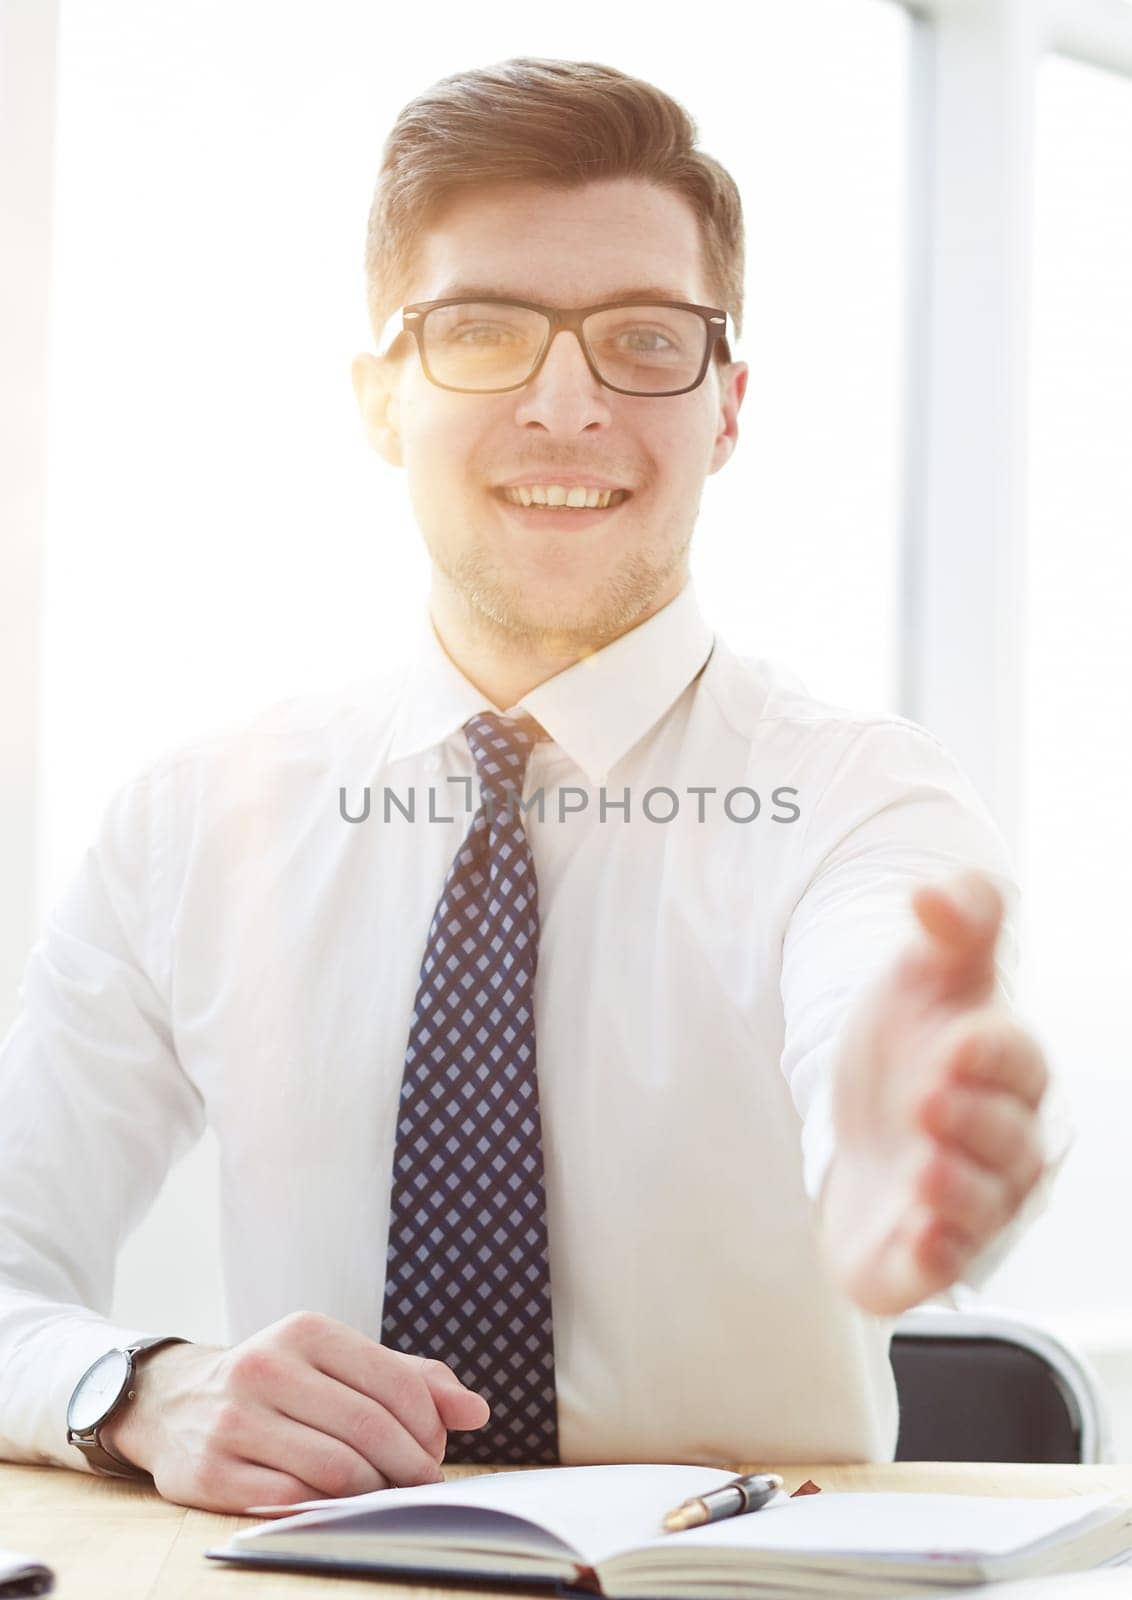 Businessman extending hand to shake by Prosto